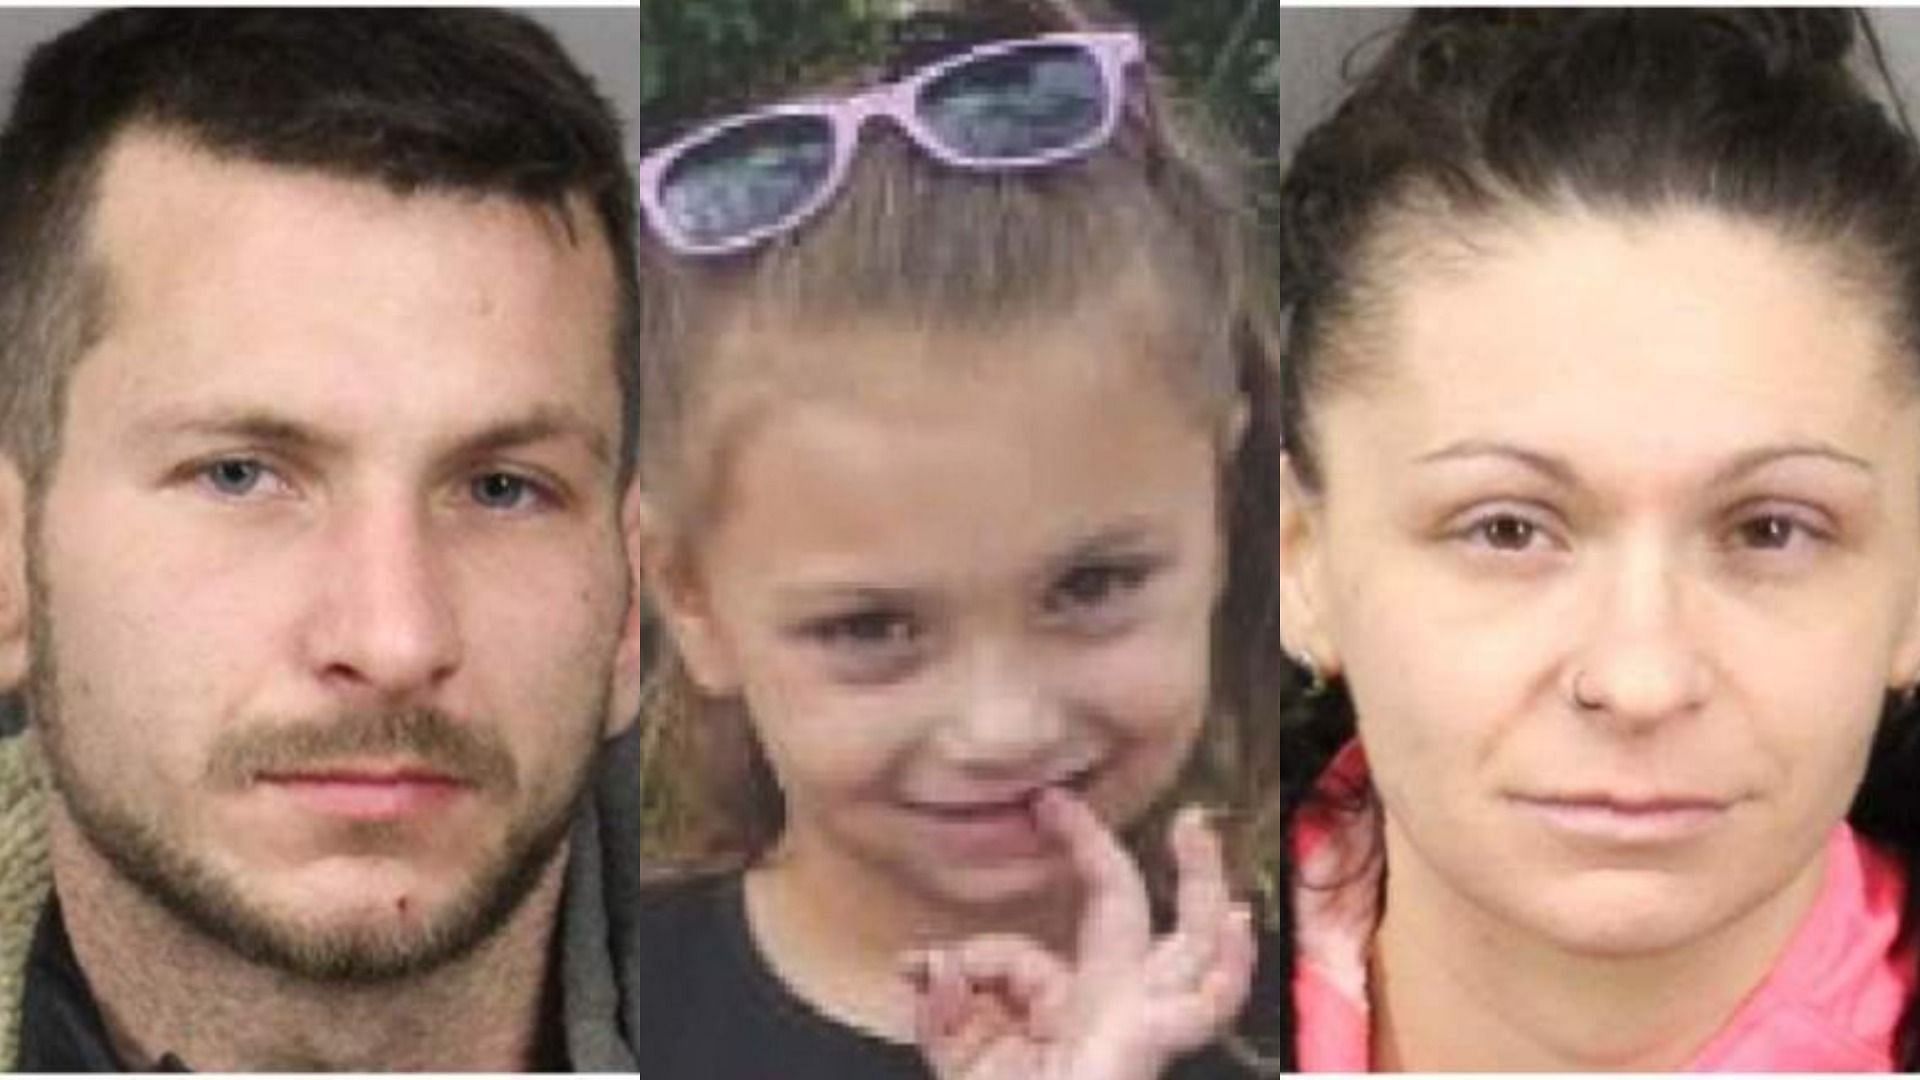 Kimberly Cooper and Kirk Shultis Jr. are Paislee Shultis&#039; biological but non-custodial parents (Image via Saugerties Police Department)